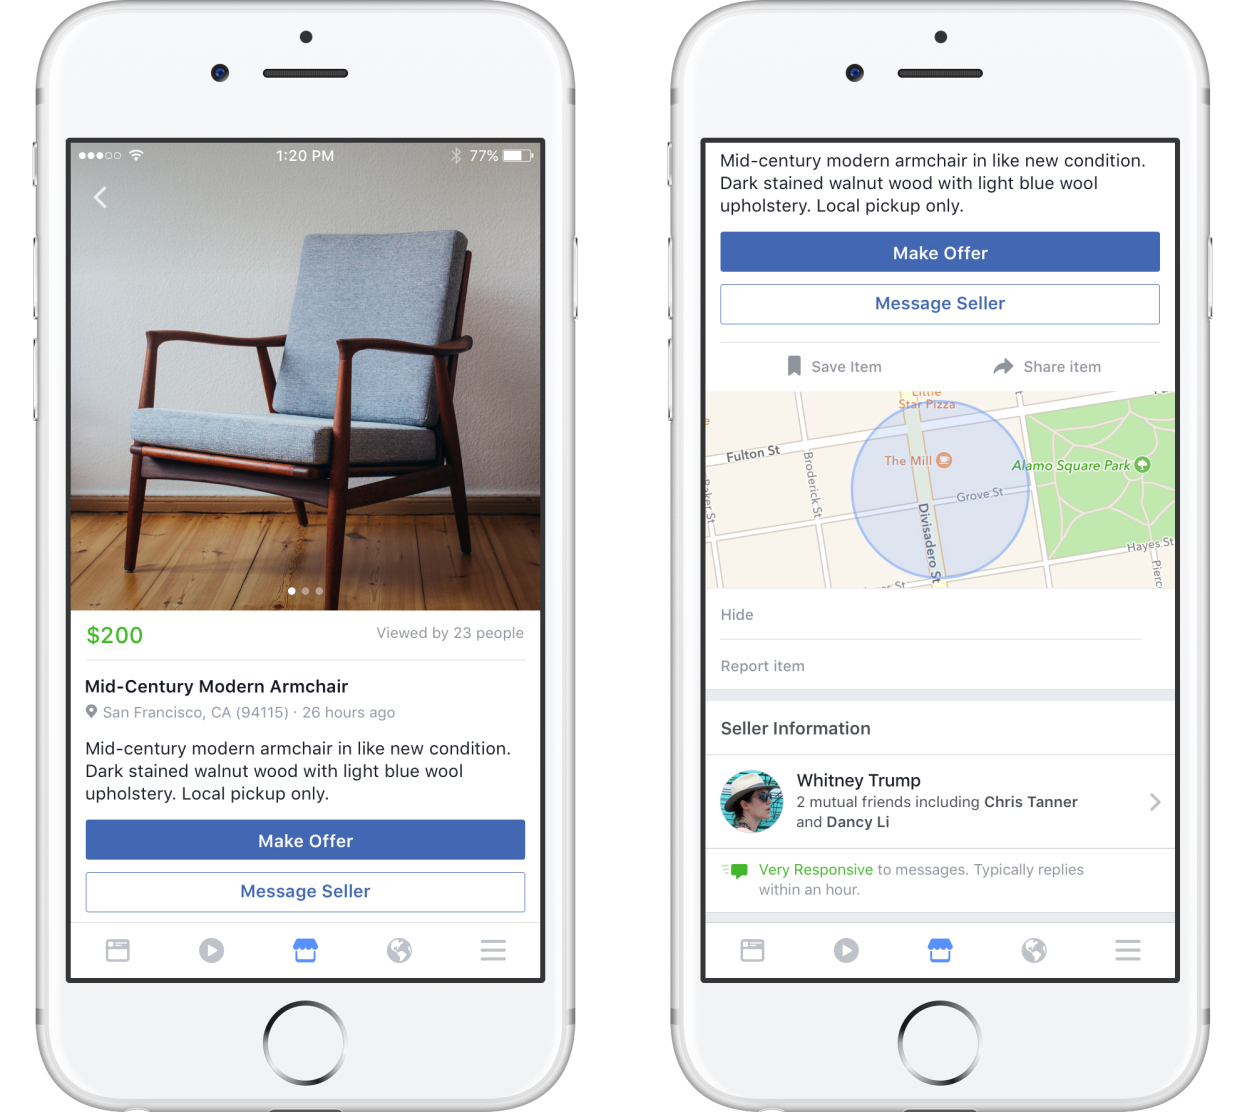 Facebook launches Marketplace feature, letting users buy and sell items